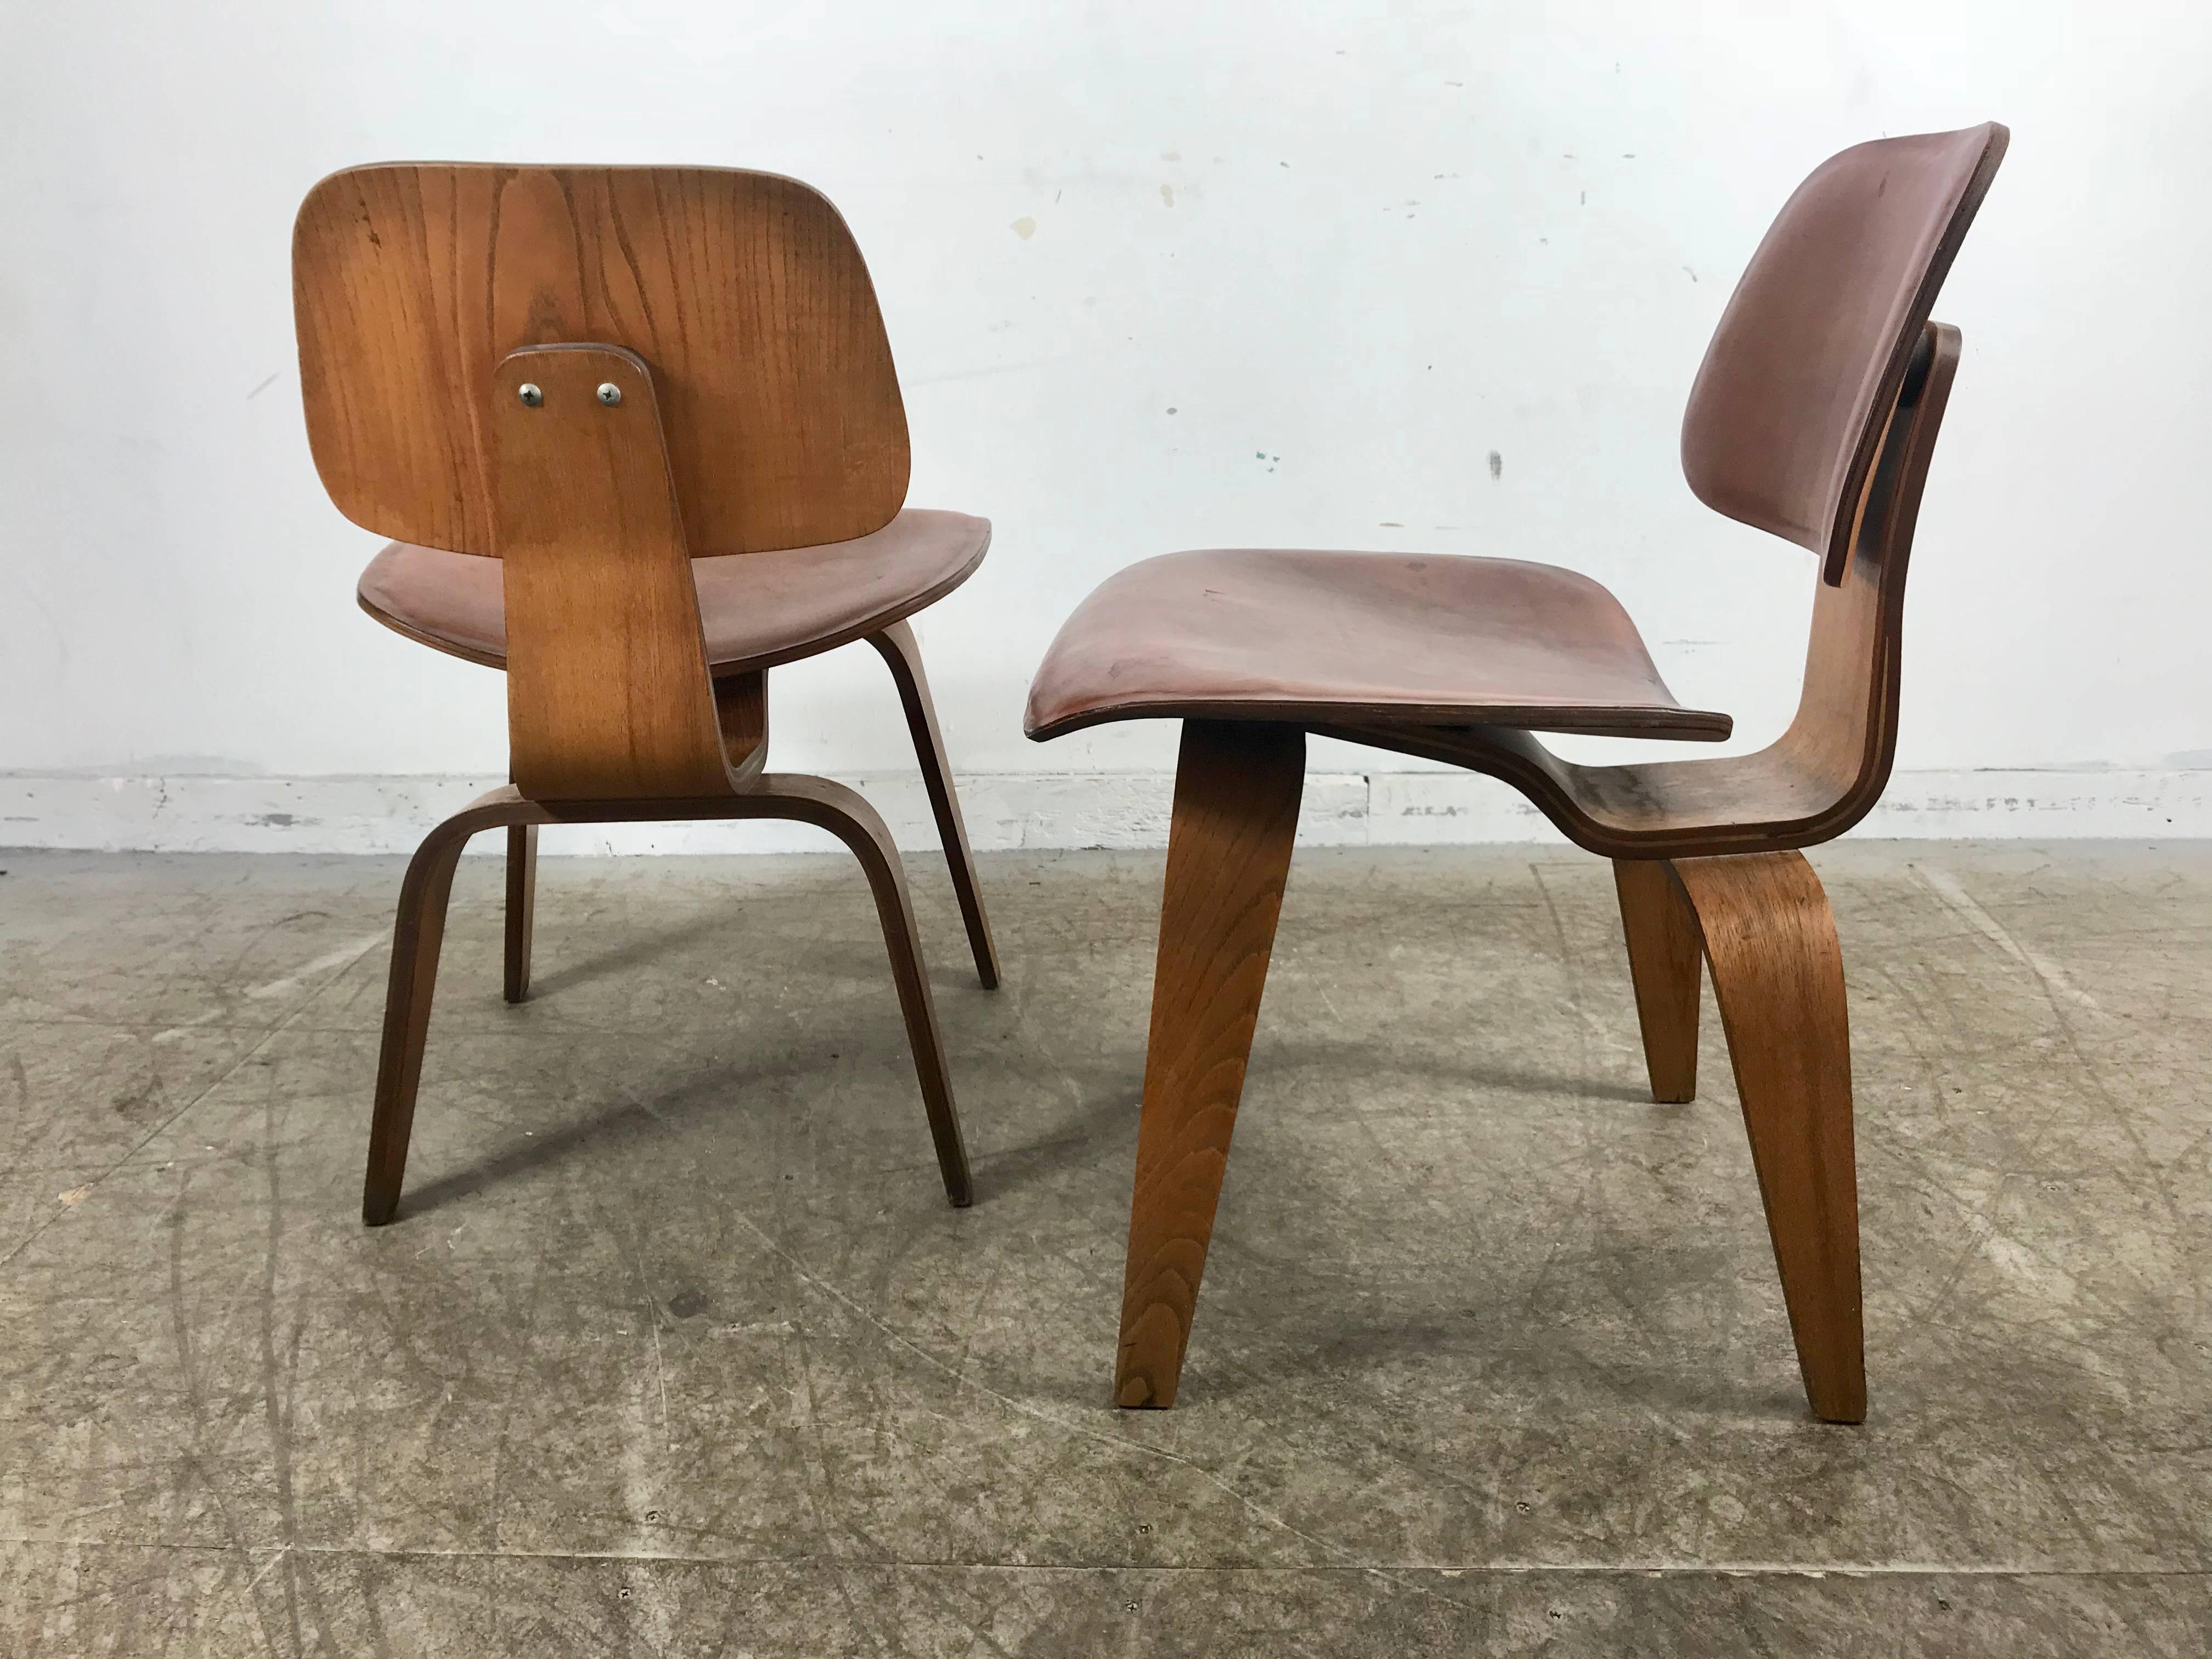 Rare early production Pair Leather and Walnut Plywood D C W's (DINING CHAIR WOOD) designed by Charles and Ray Eames, manufactured by Herman Miller / Evans.Original salmon color leather seat and  back,
An exceptional original matched pair of  LCW's